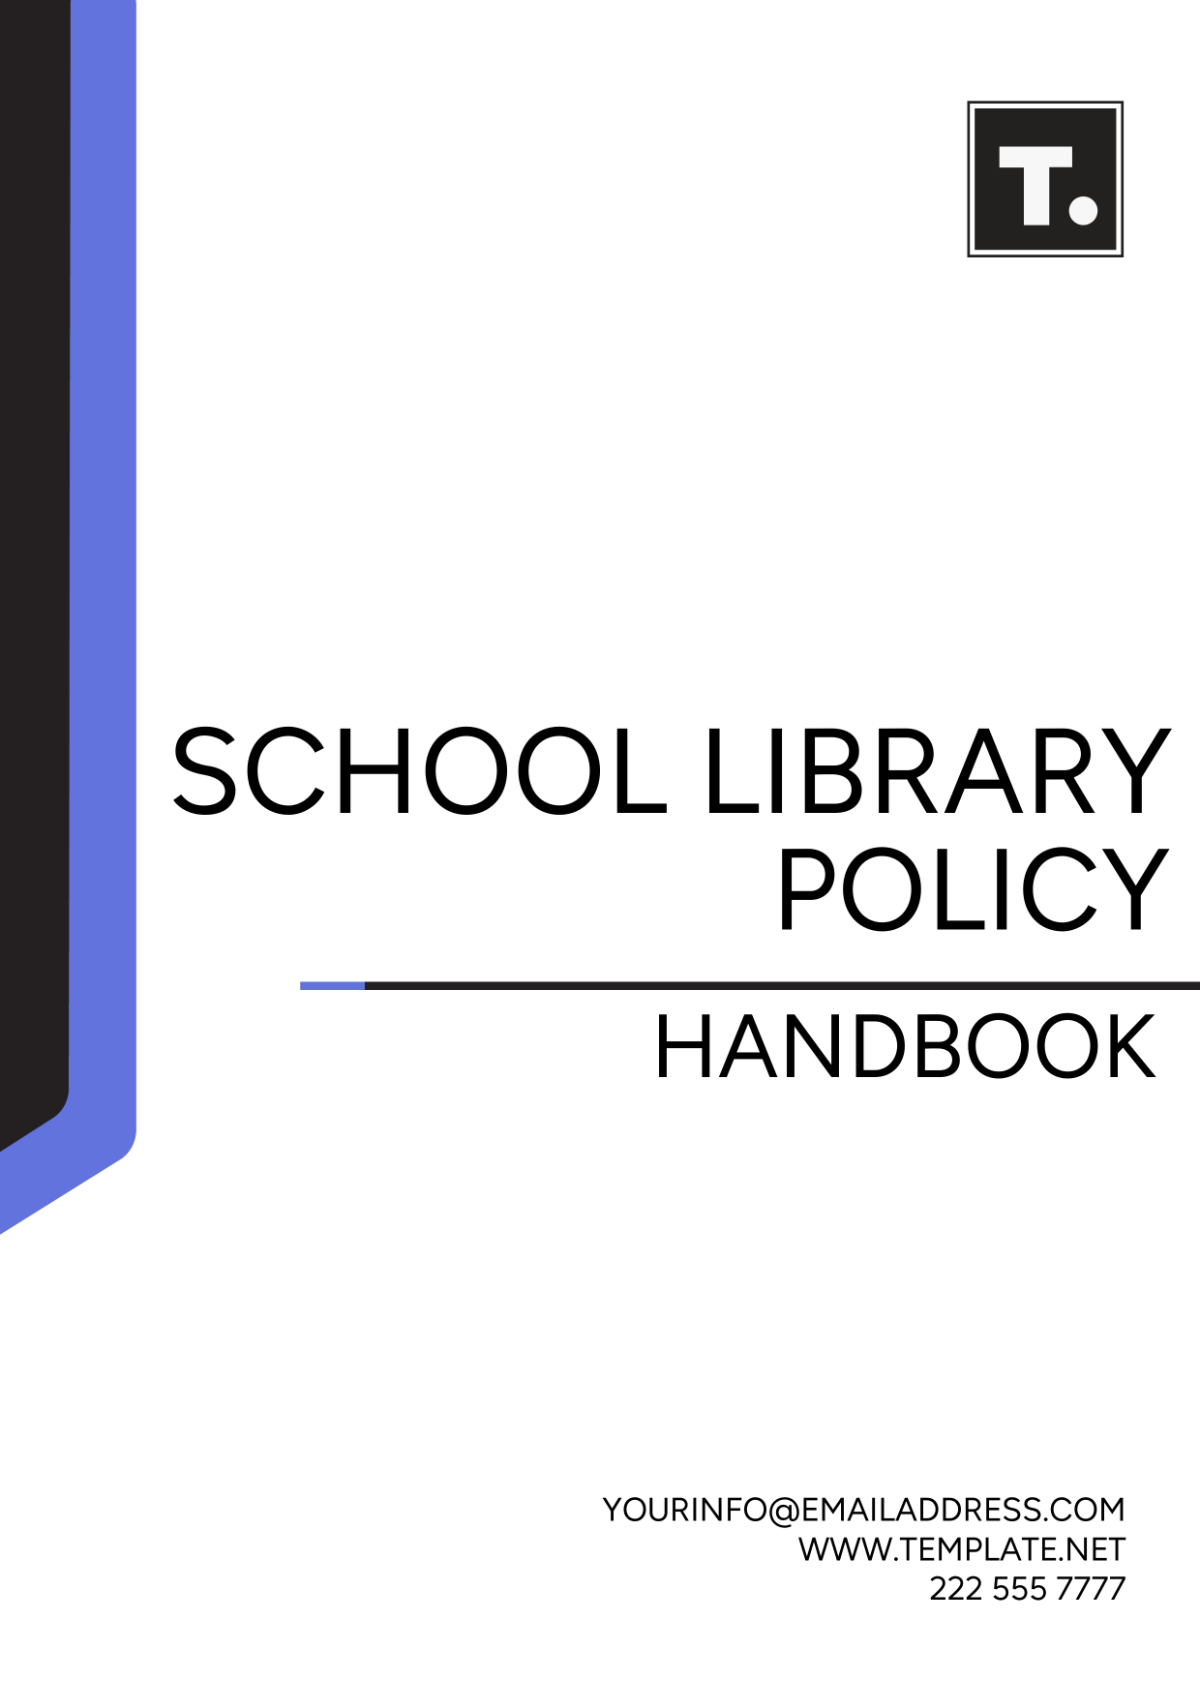 Free School Library Policy Handbook Template